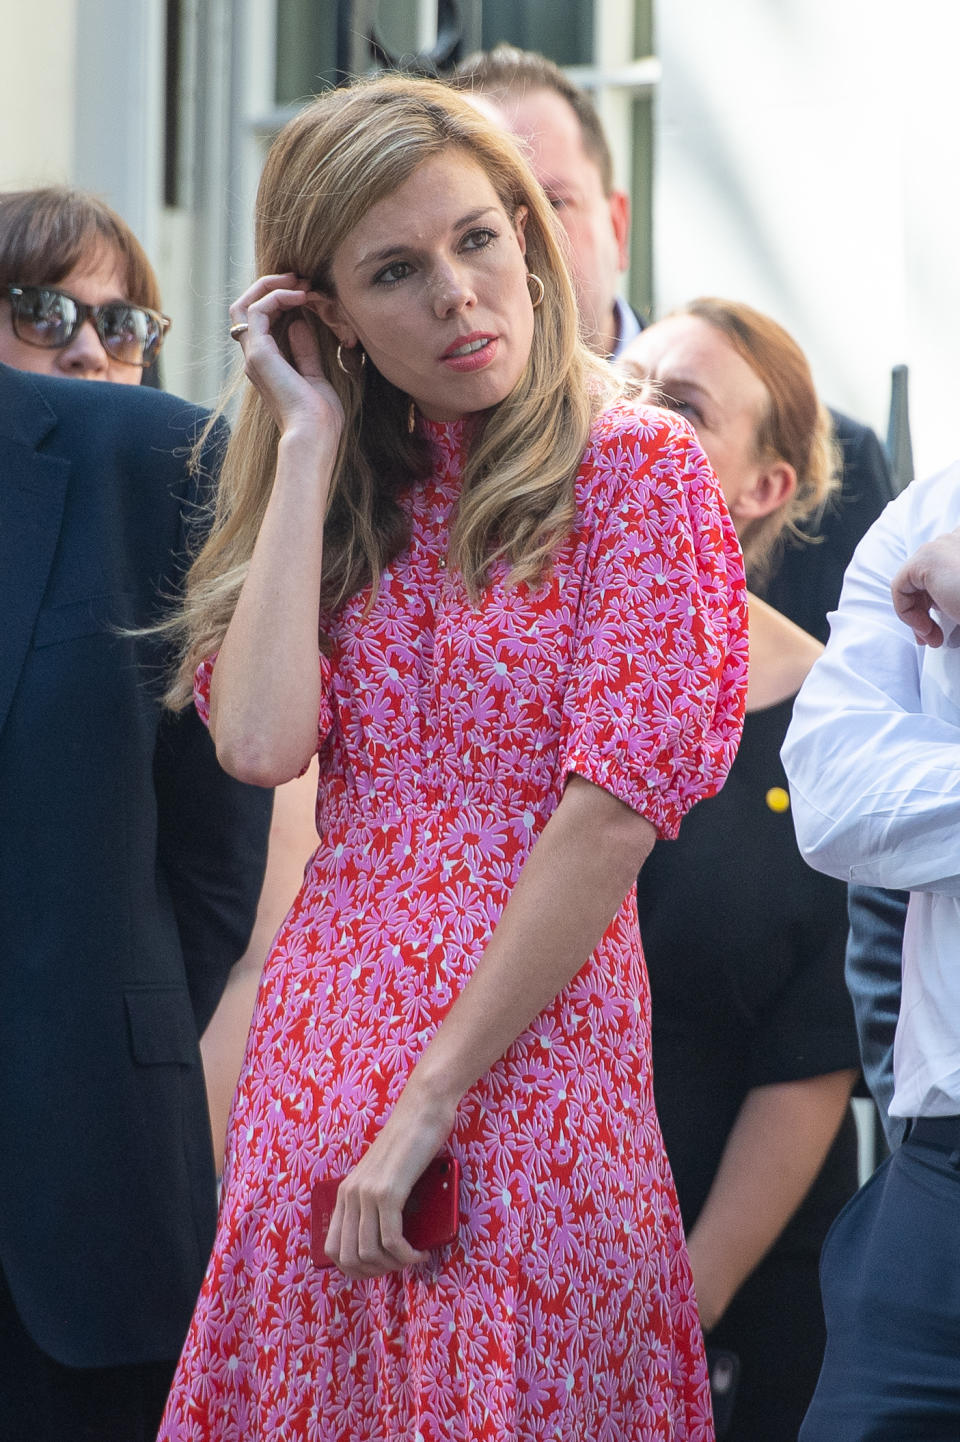 New Prime Minister Boris Johnson's partner Carrie Symonds waits for him to make a speech outside 10 Downing Street, London, after meeting Queen Elizabeth II and accepting her invitation to become Prime Minister and form a new government.